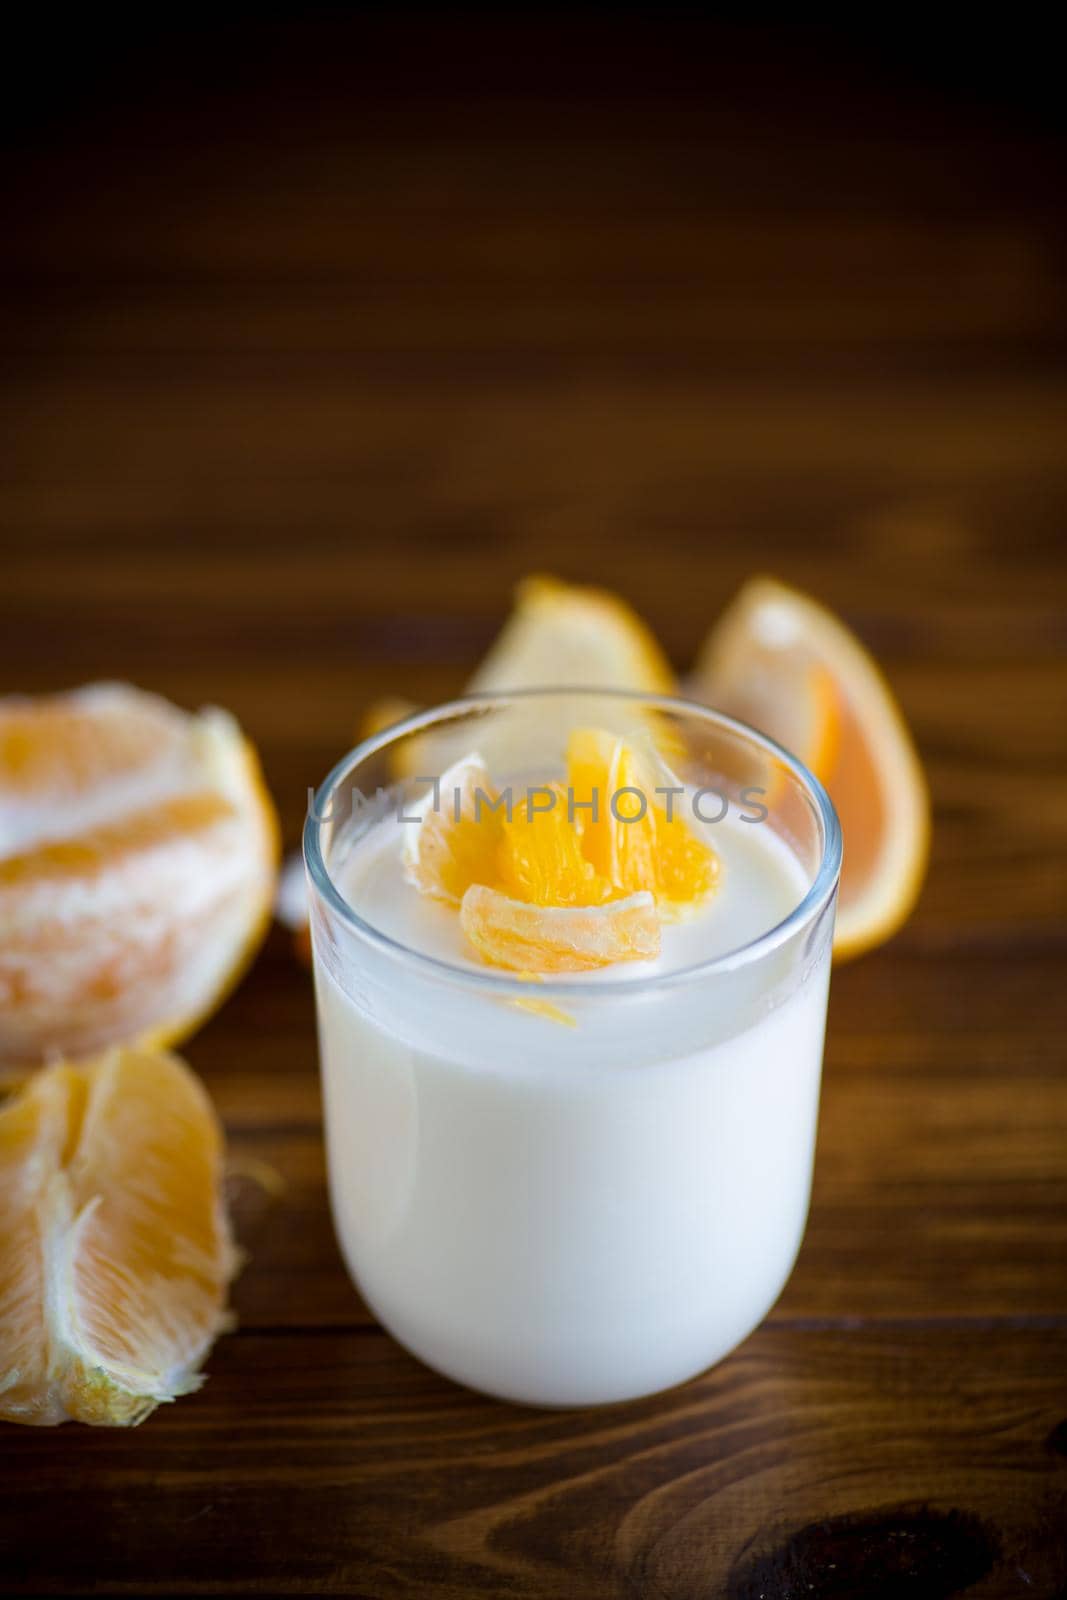 homemade sweet yogurt in a glass with oranges on a wooden table